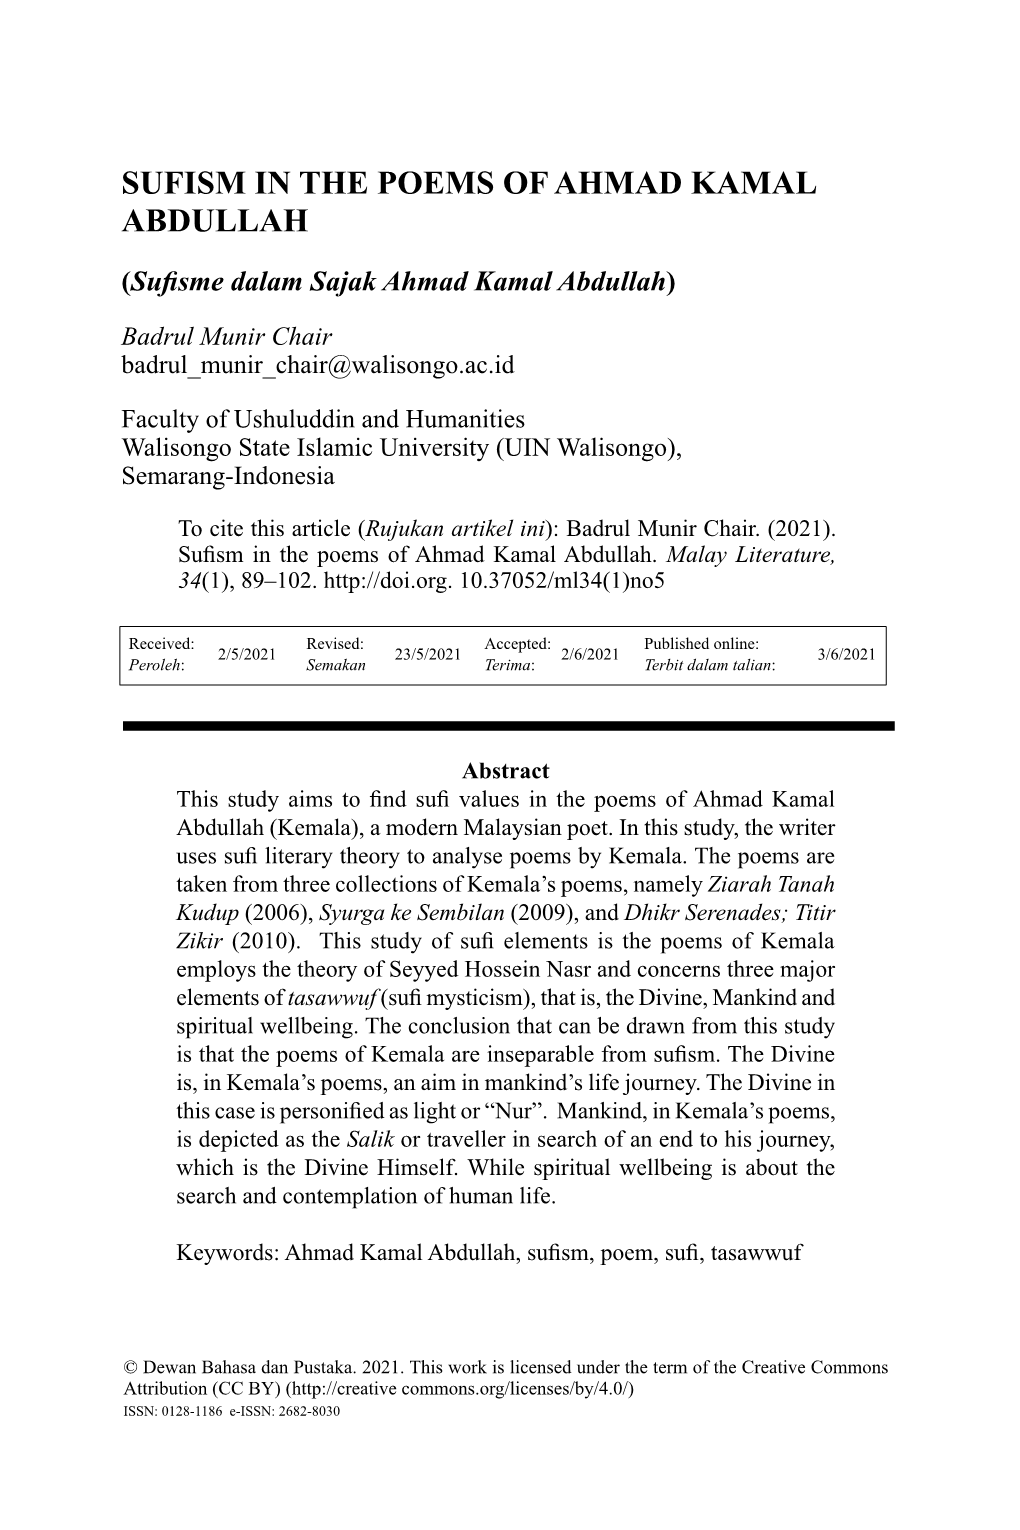 Sufism in the Poems of Ahmad Kamal Abdullah